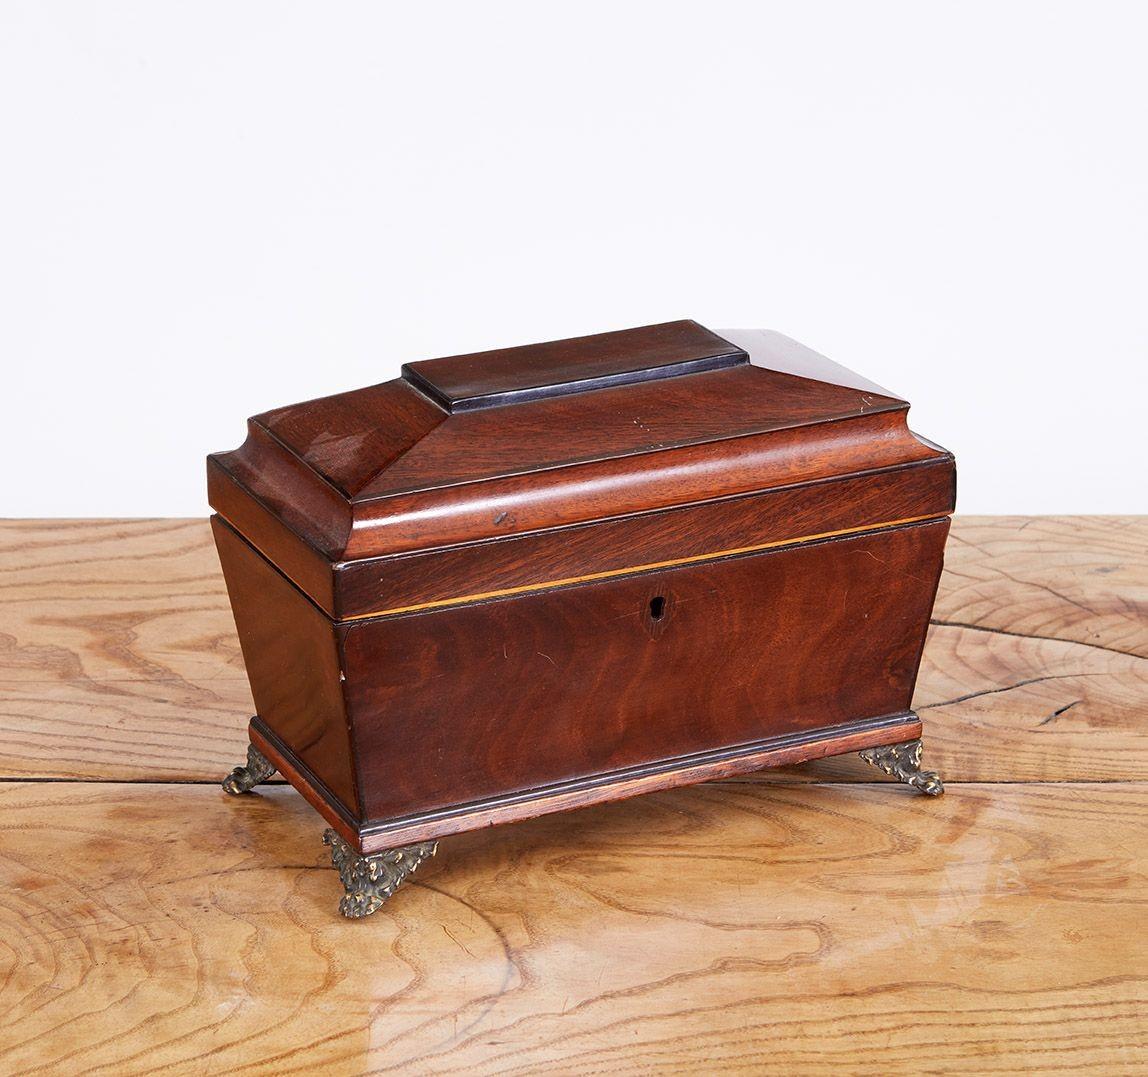 Fine English Regency mahogany caddy with canted sides and shaped hinged top with ebony stringing and original brass paw feet. Good color and patina.
